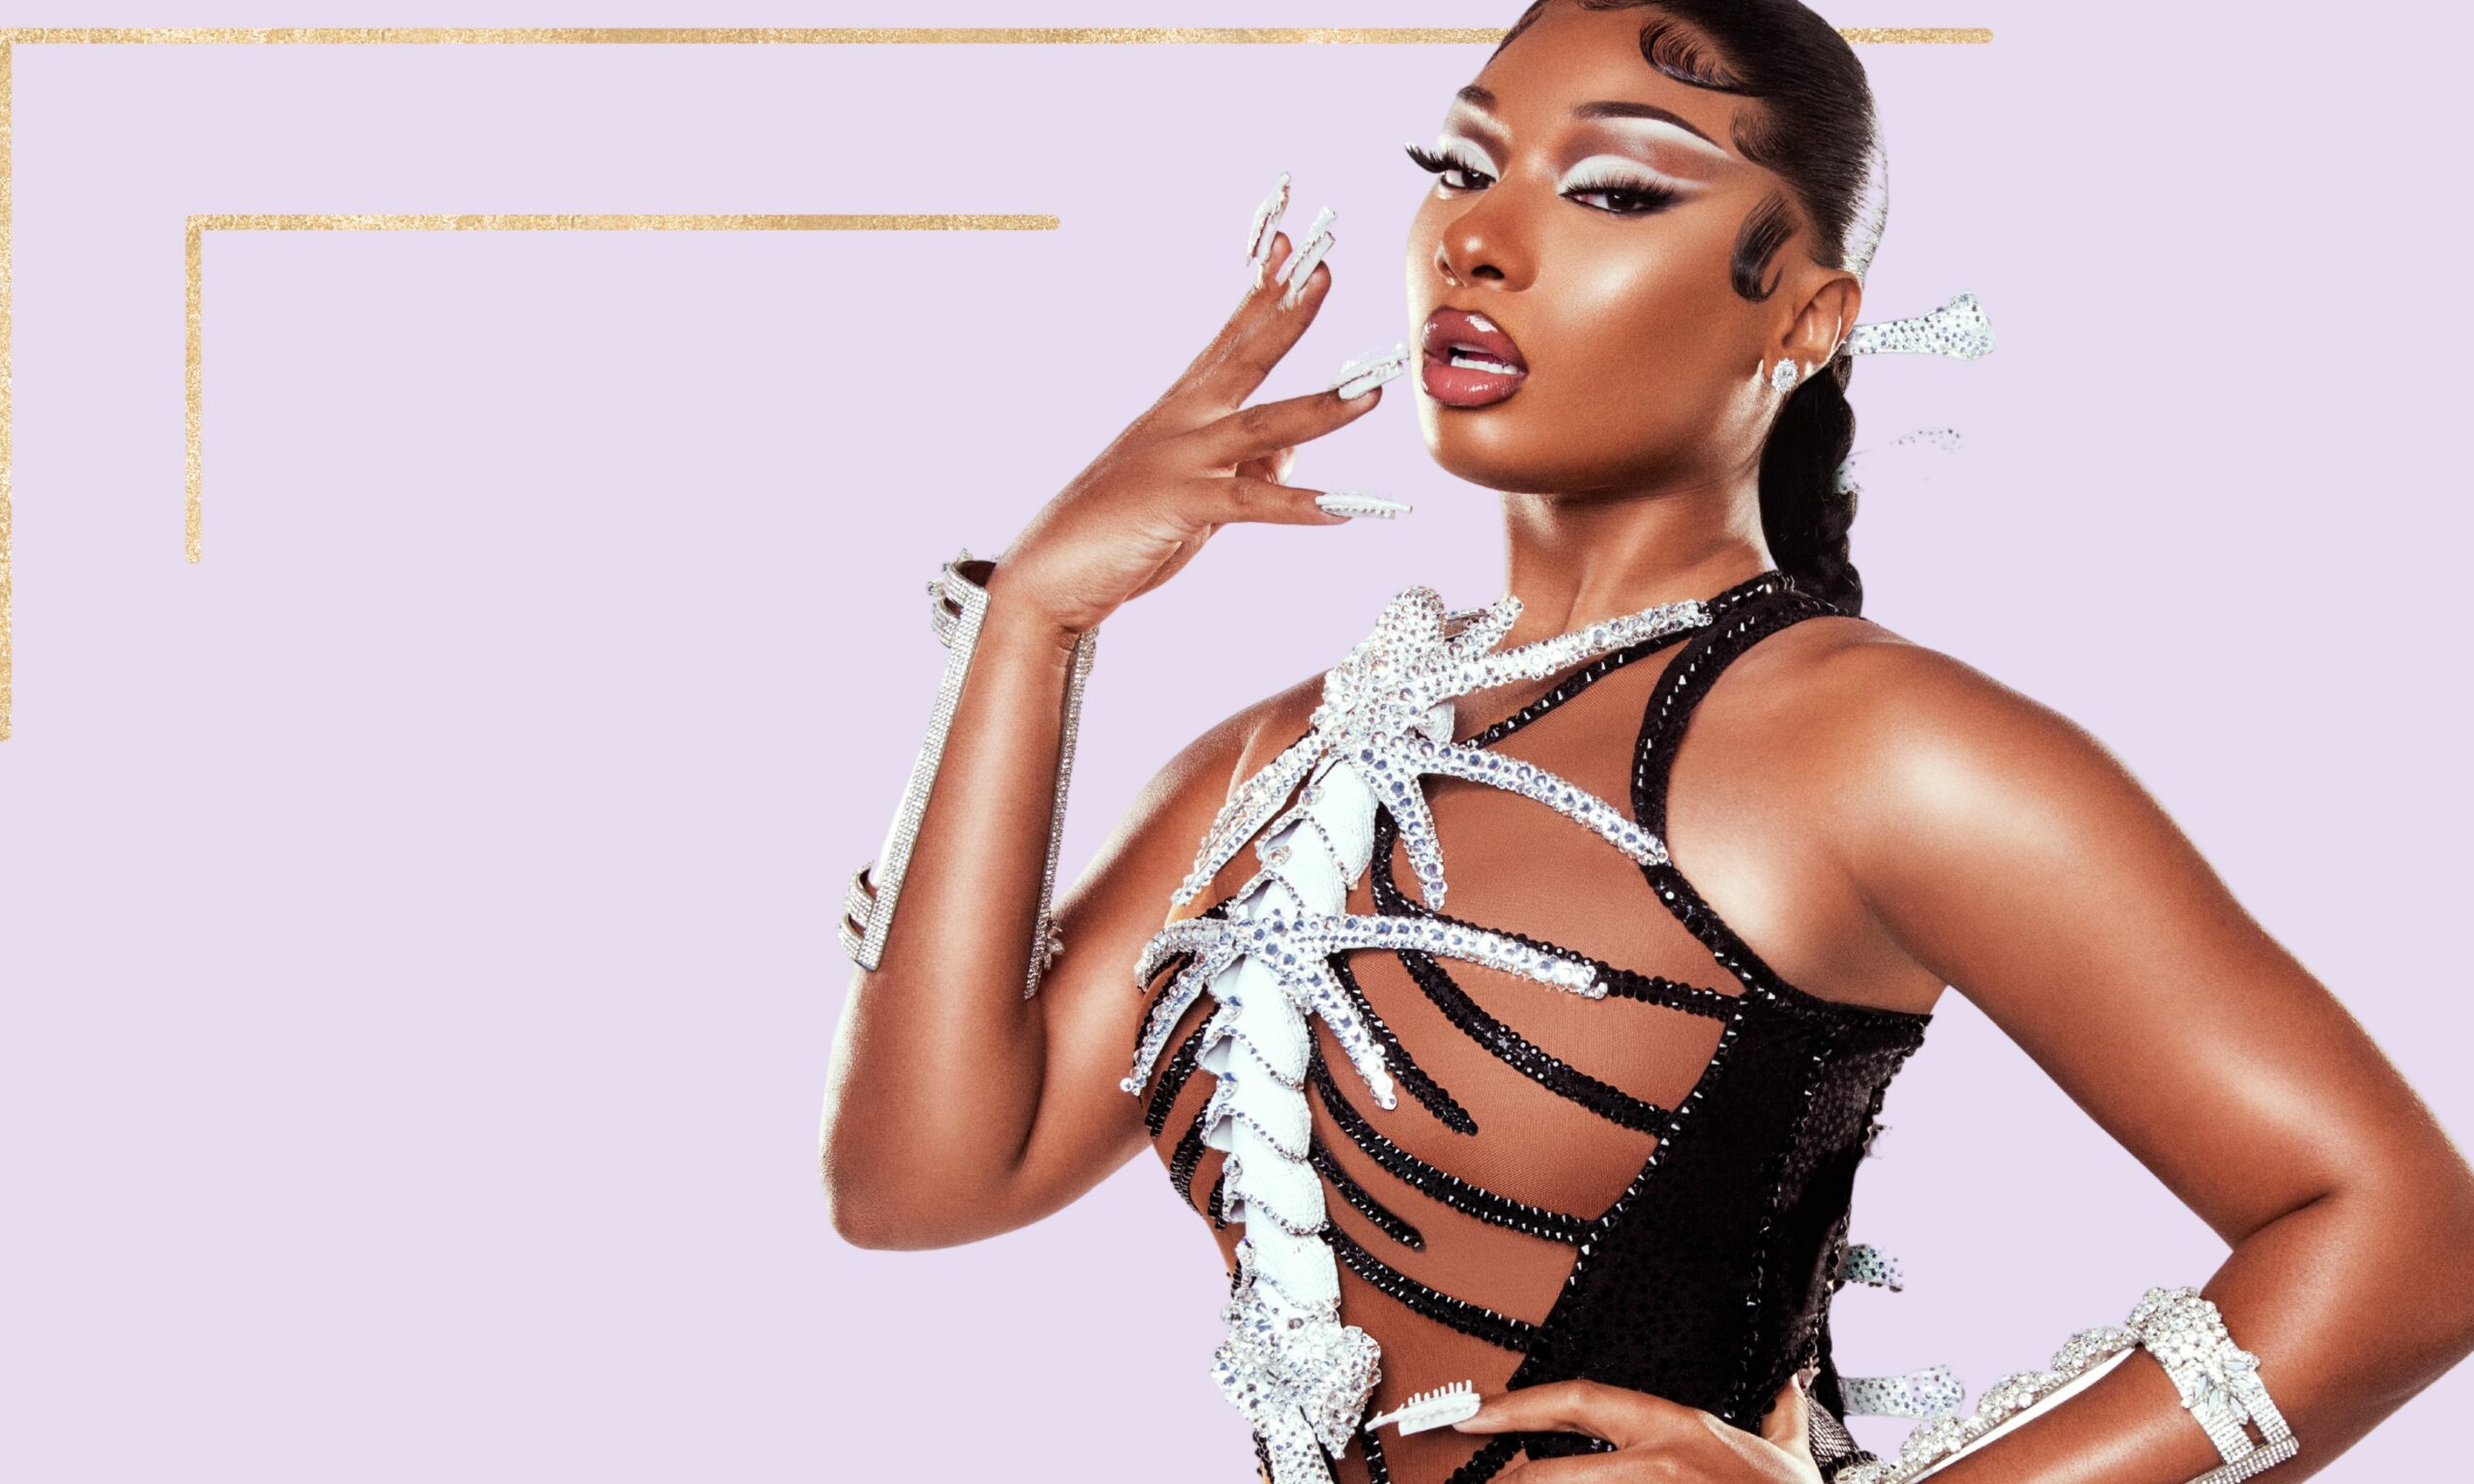 Five on it: Megan Thee Stallion conducts business on her own terms with Traumazine